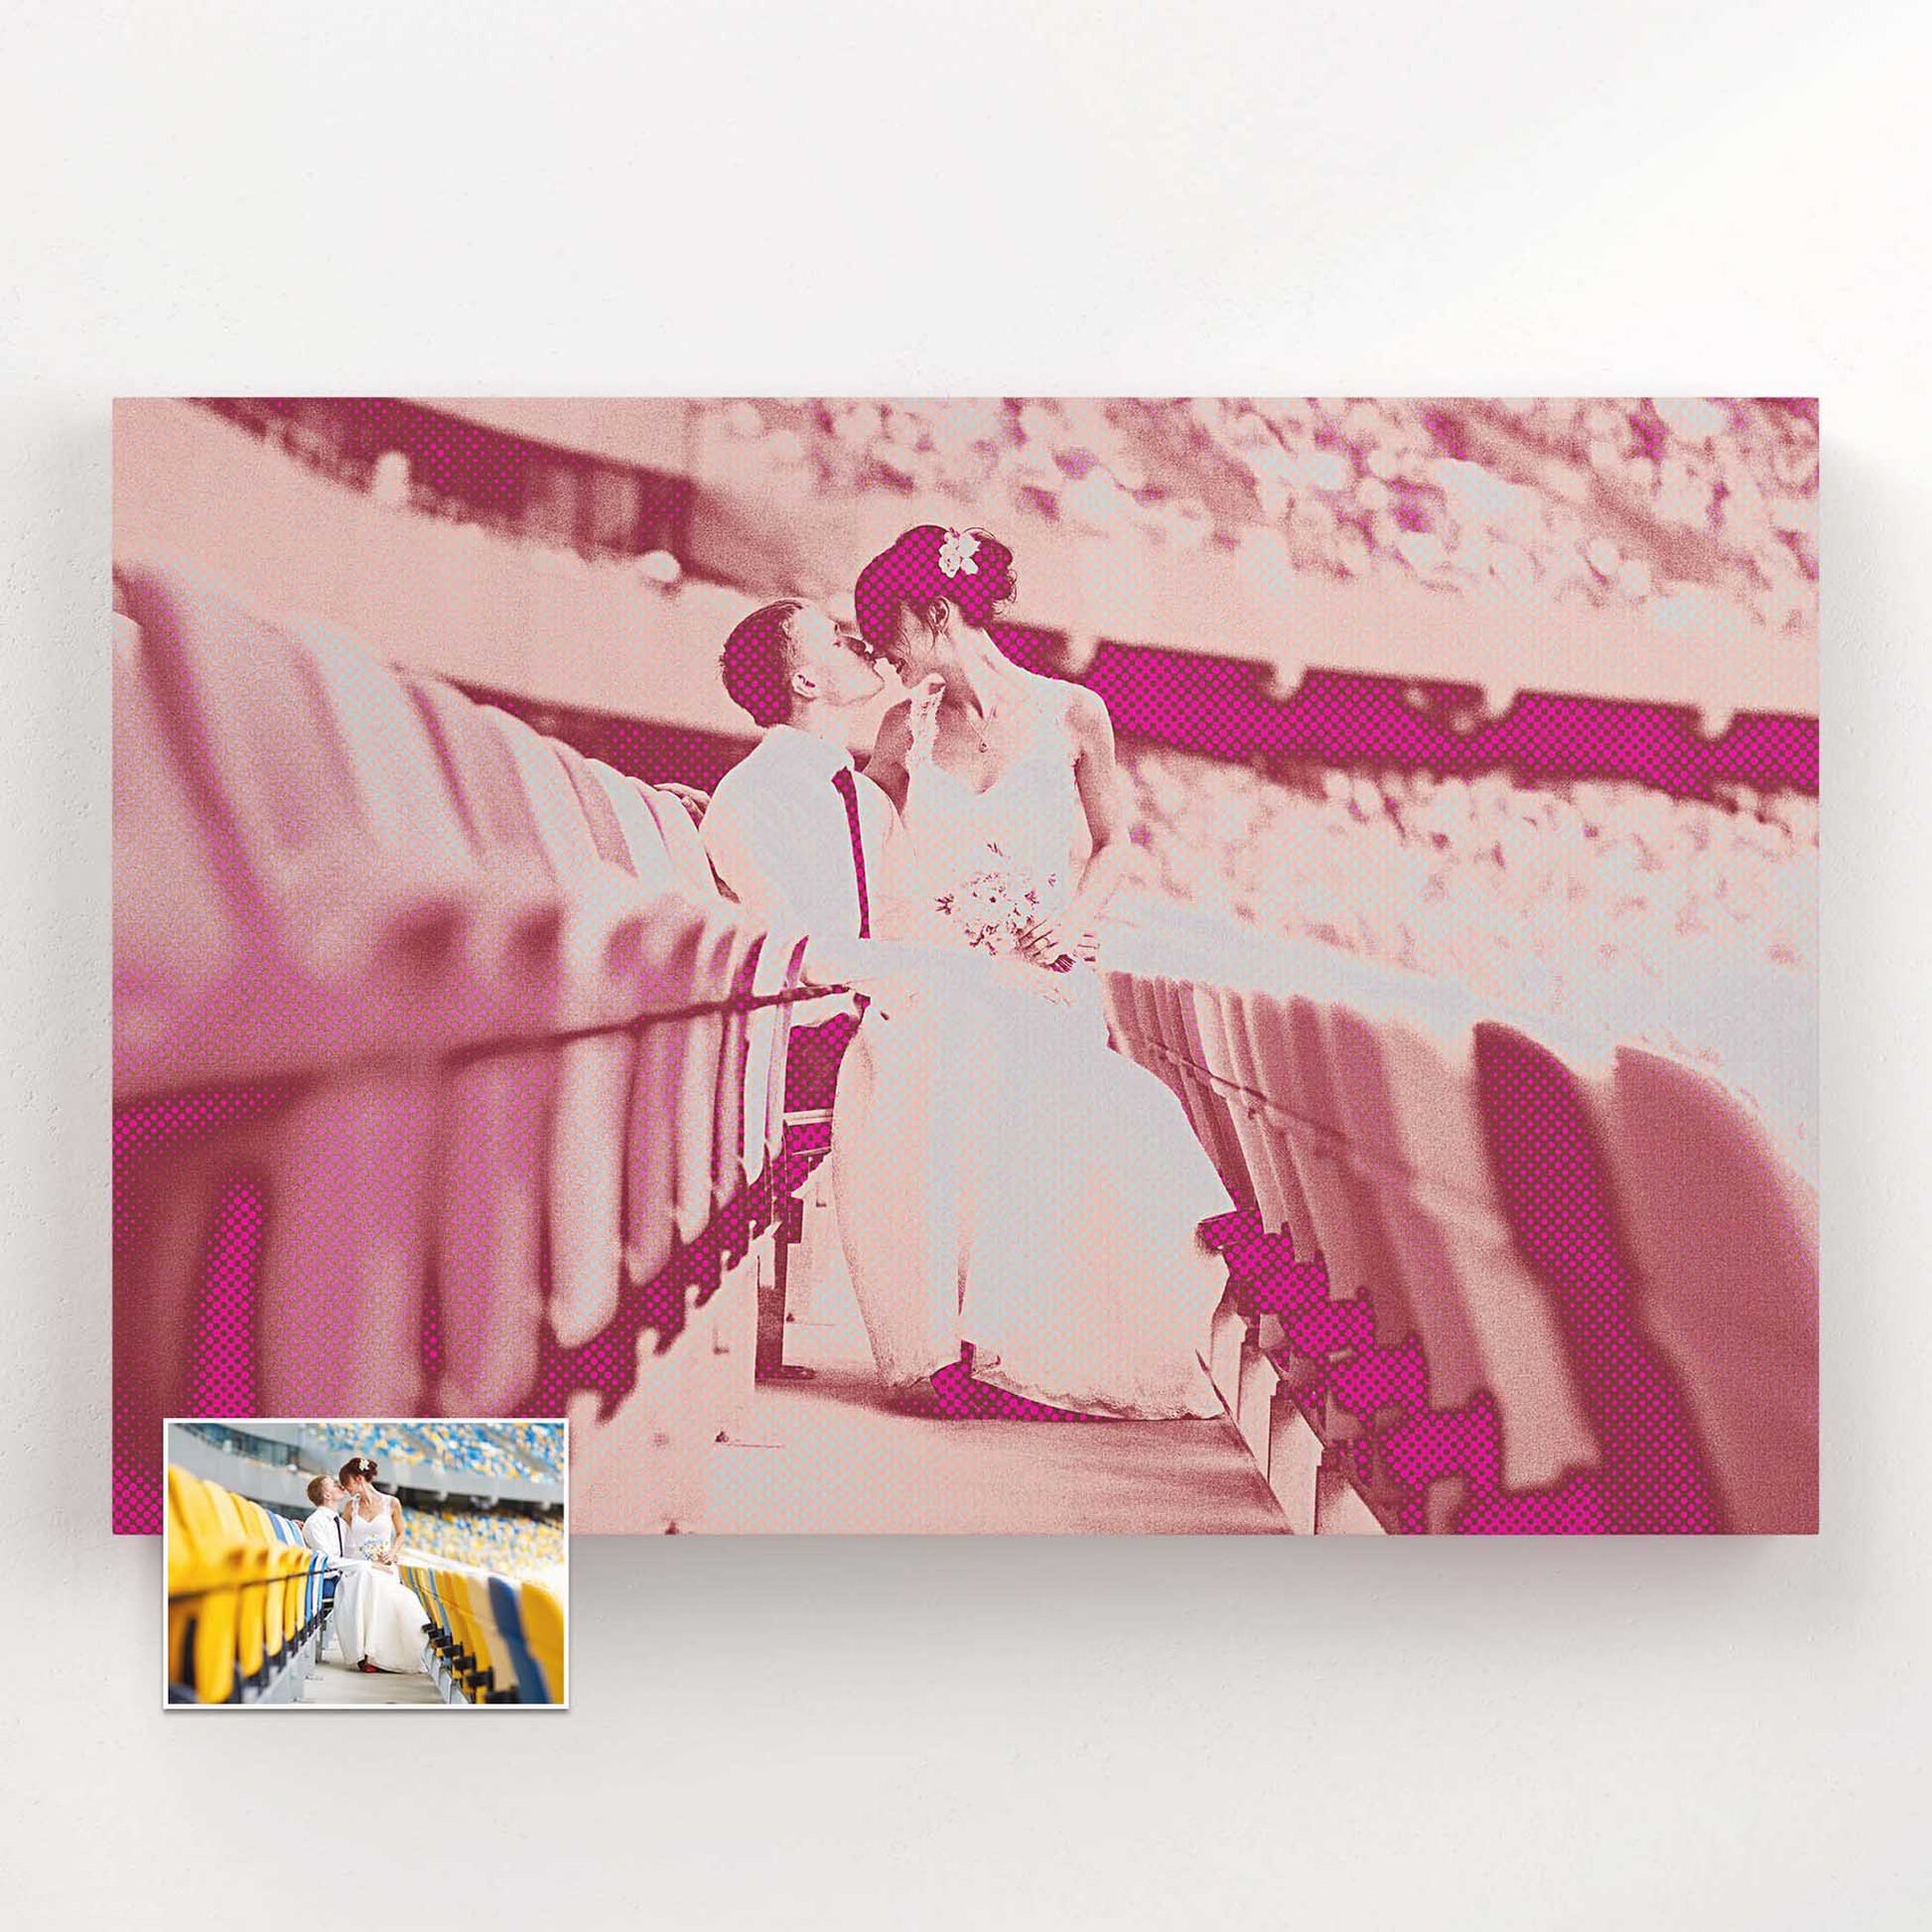 Step into the world of pop art with our Personalised Pink Pop Art Canvas. Its vibrant and trendy design, along with the halftone texture, brings a cool and hip vibe to any space. Whether it's a wedding, anniversary, graduation, or party